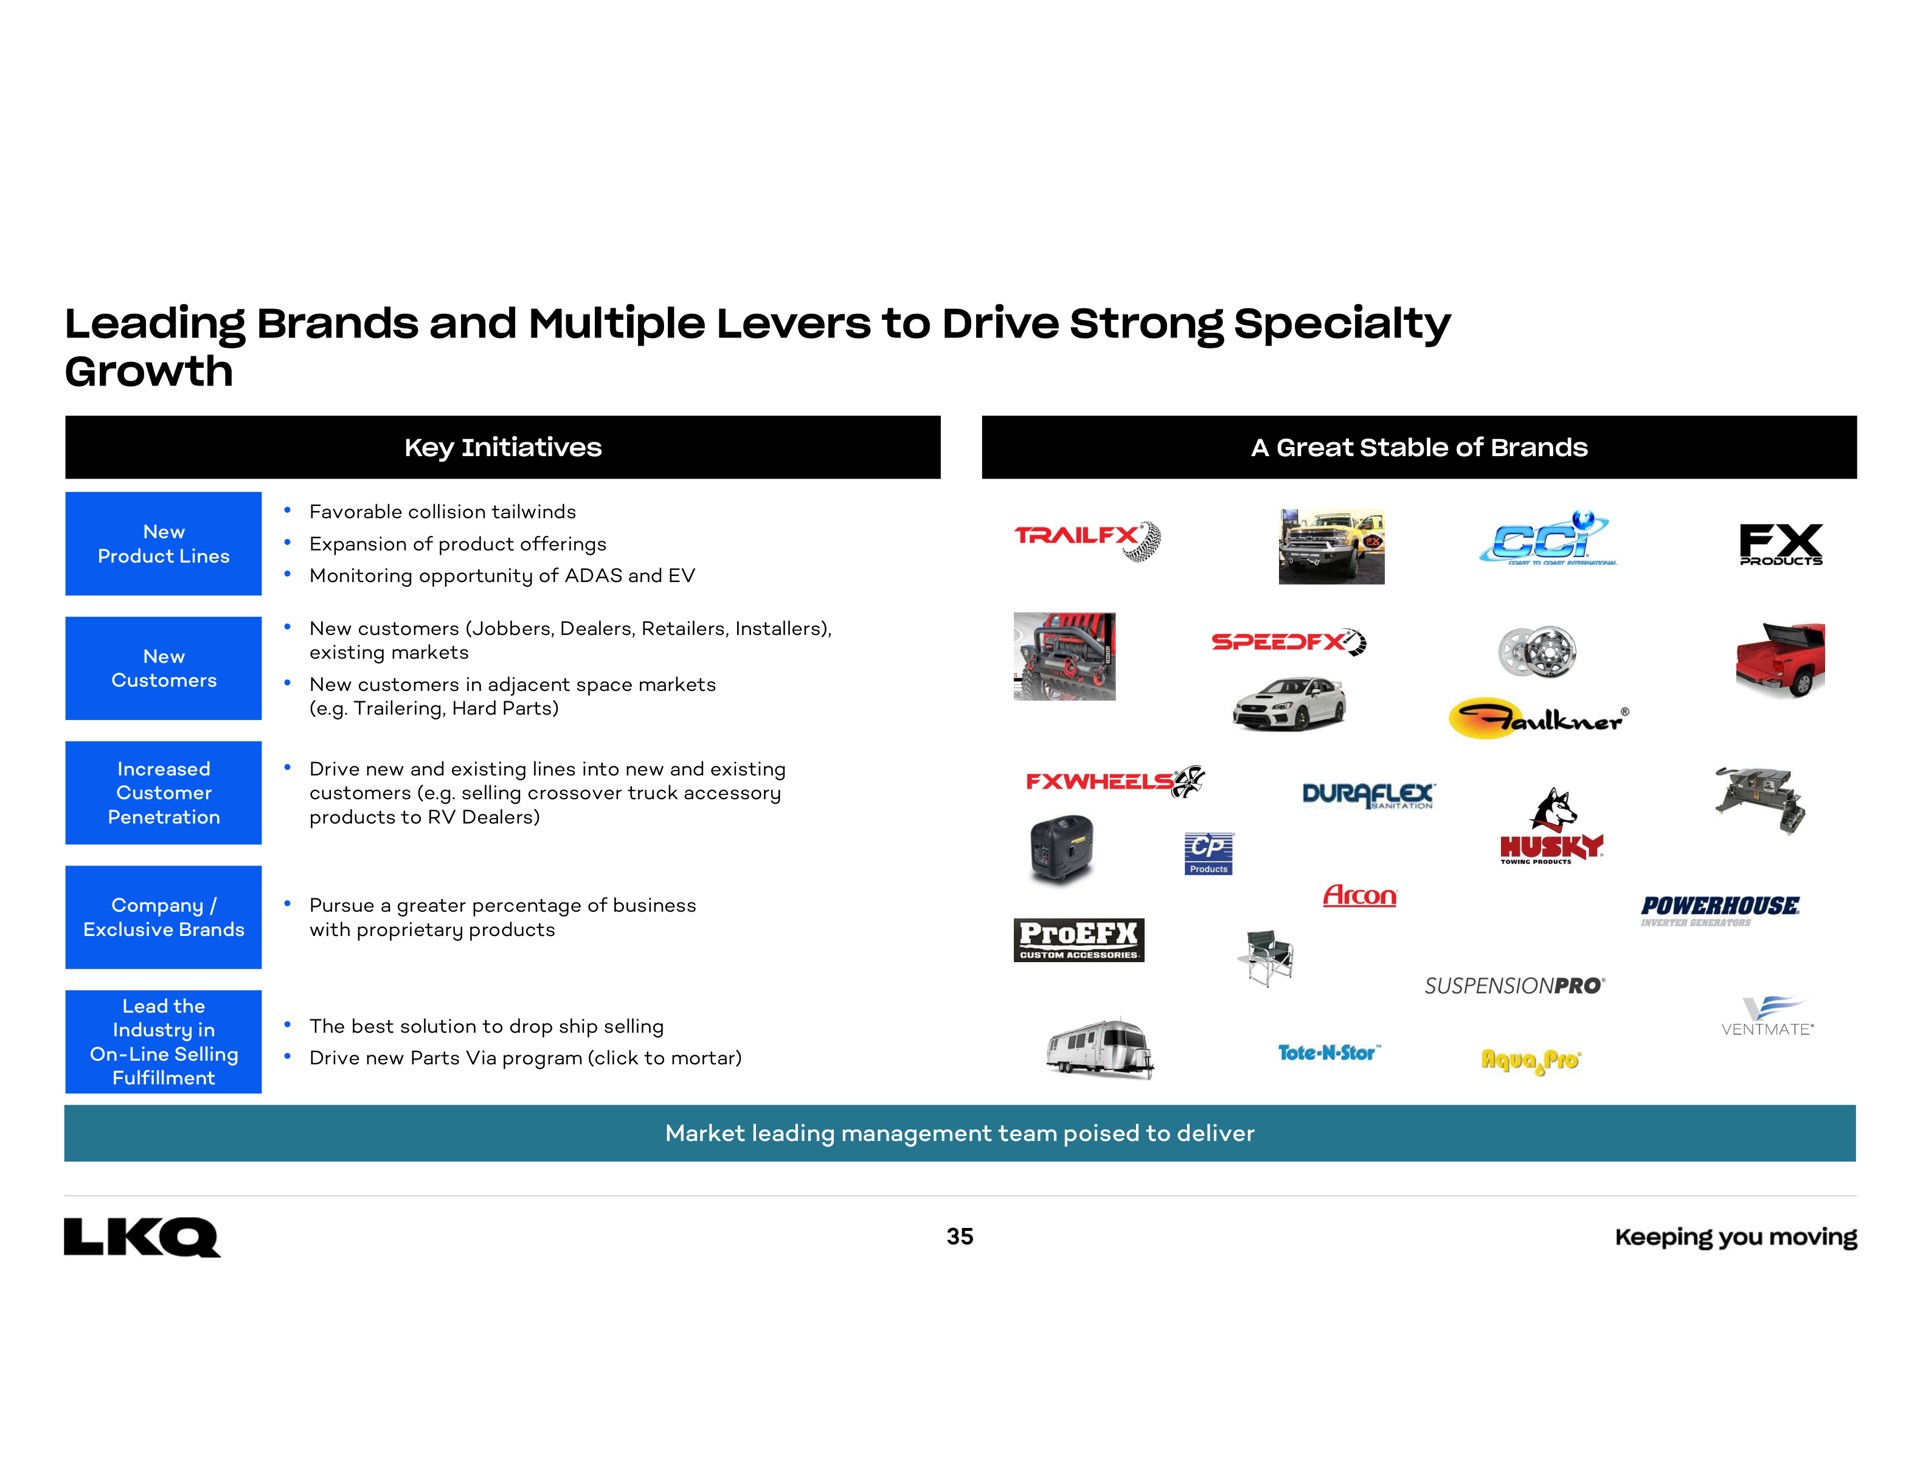 leading brands and multiple levers to drive strong specialty growth | LKQ